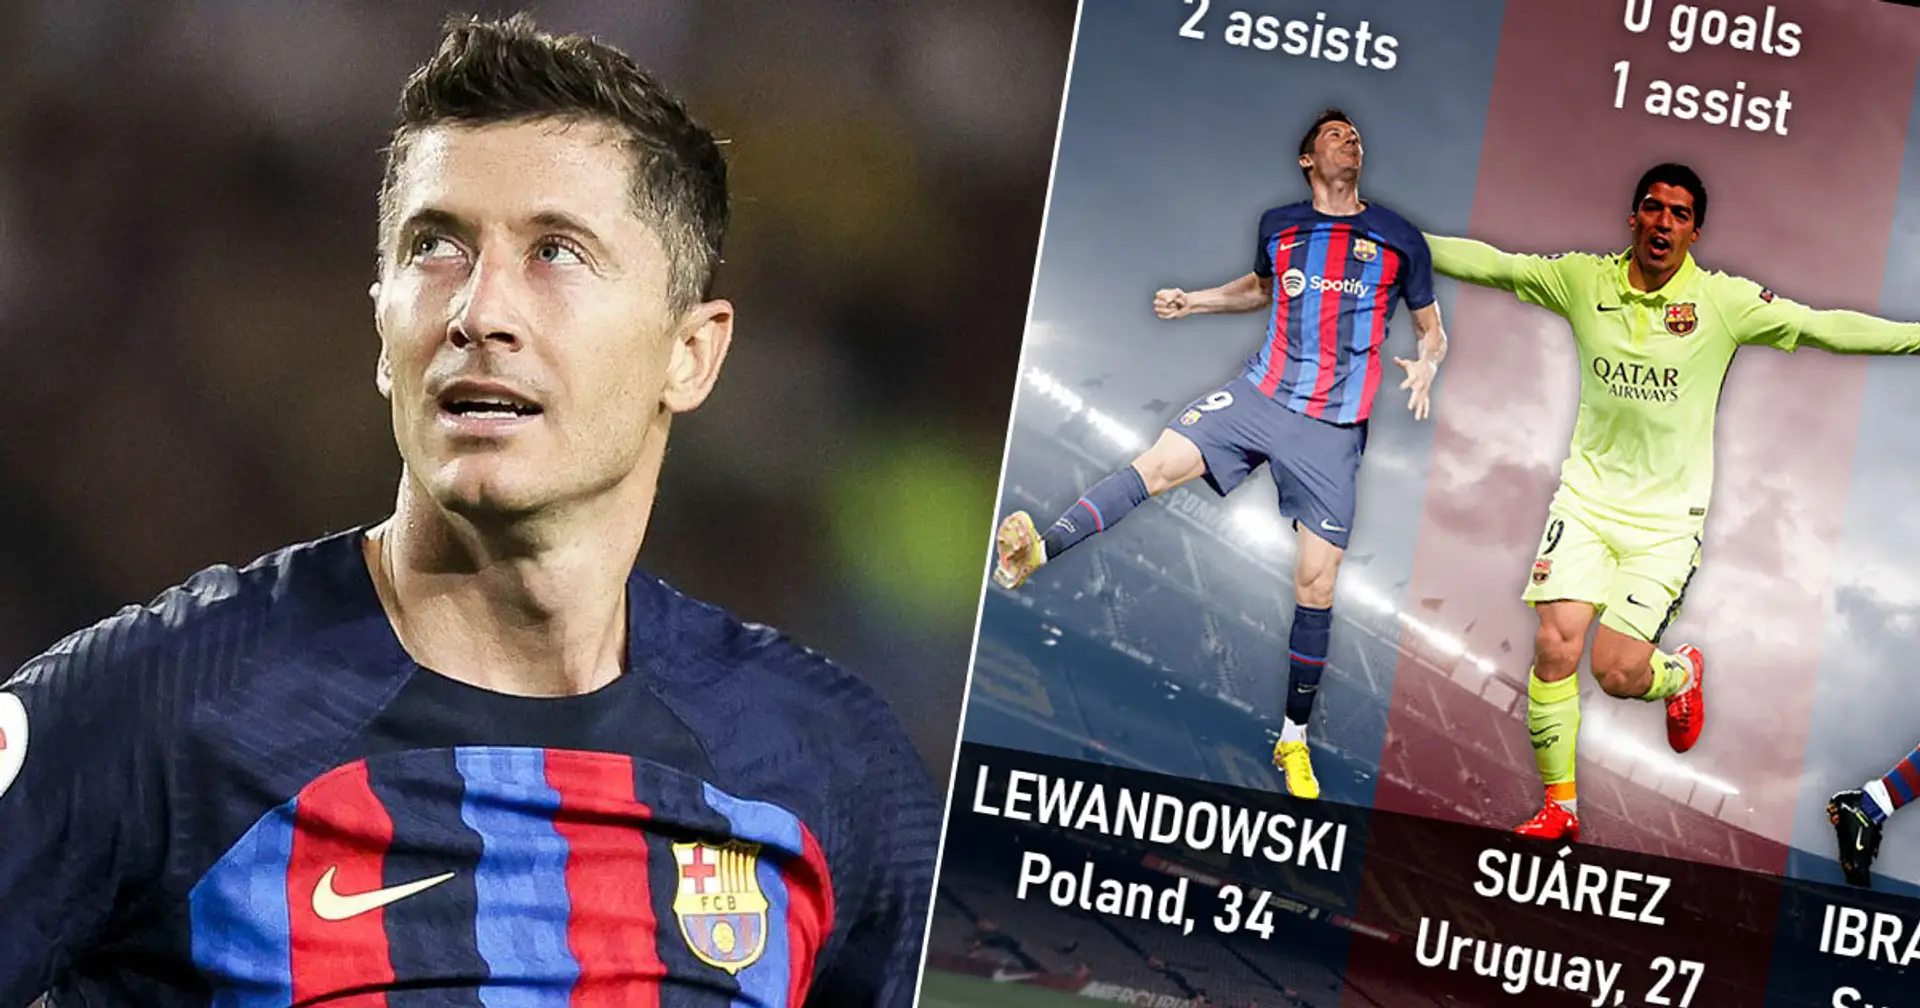 Lewandowski's start at Camp Nou compared to 4 other iconic Blaugrana strikers